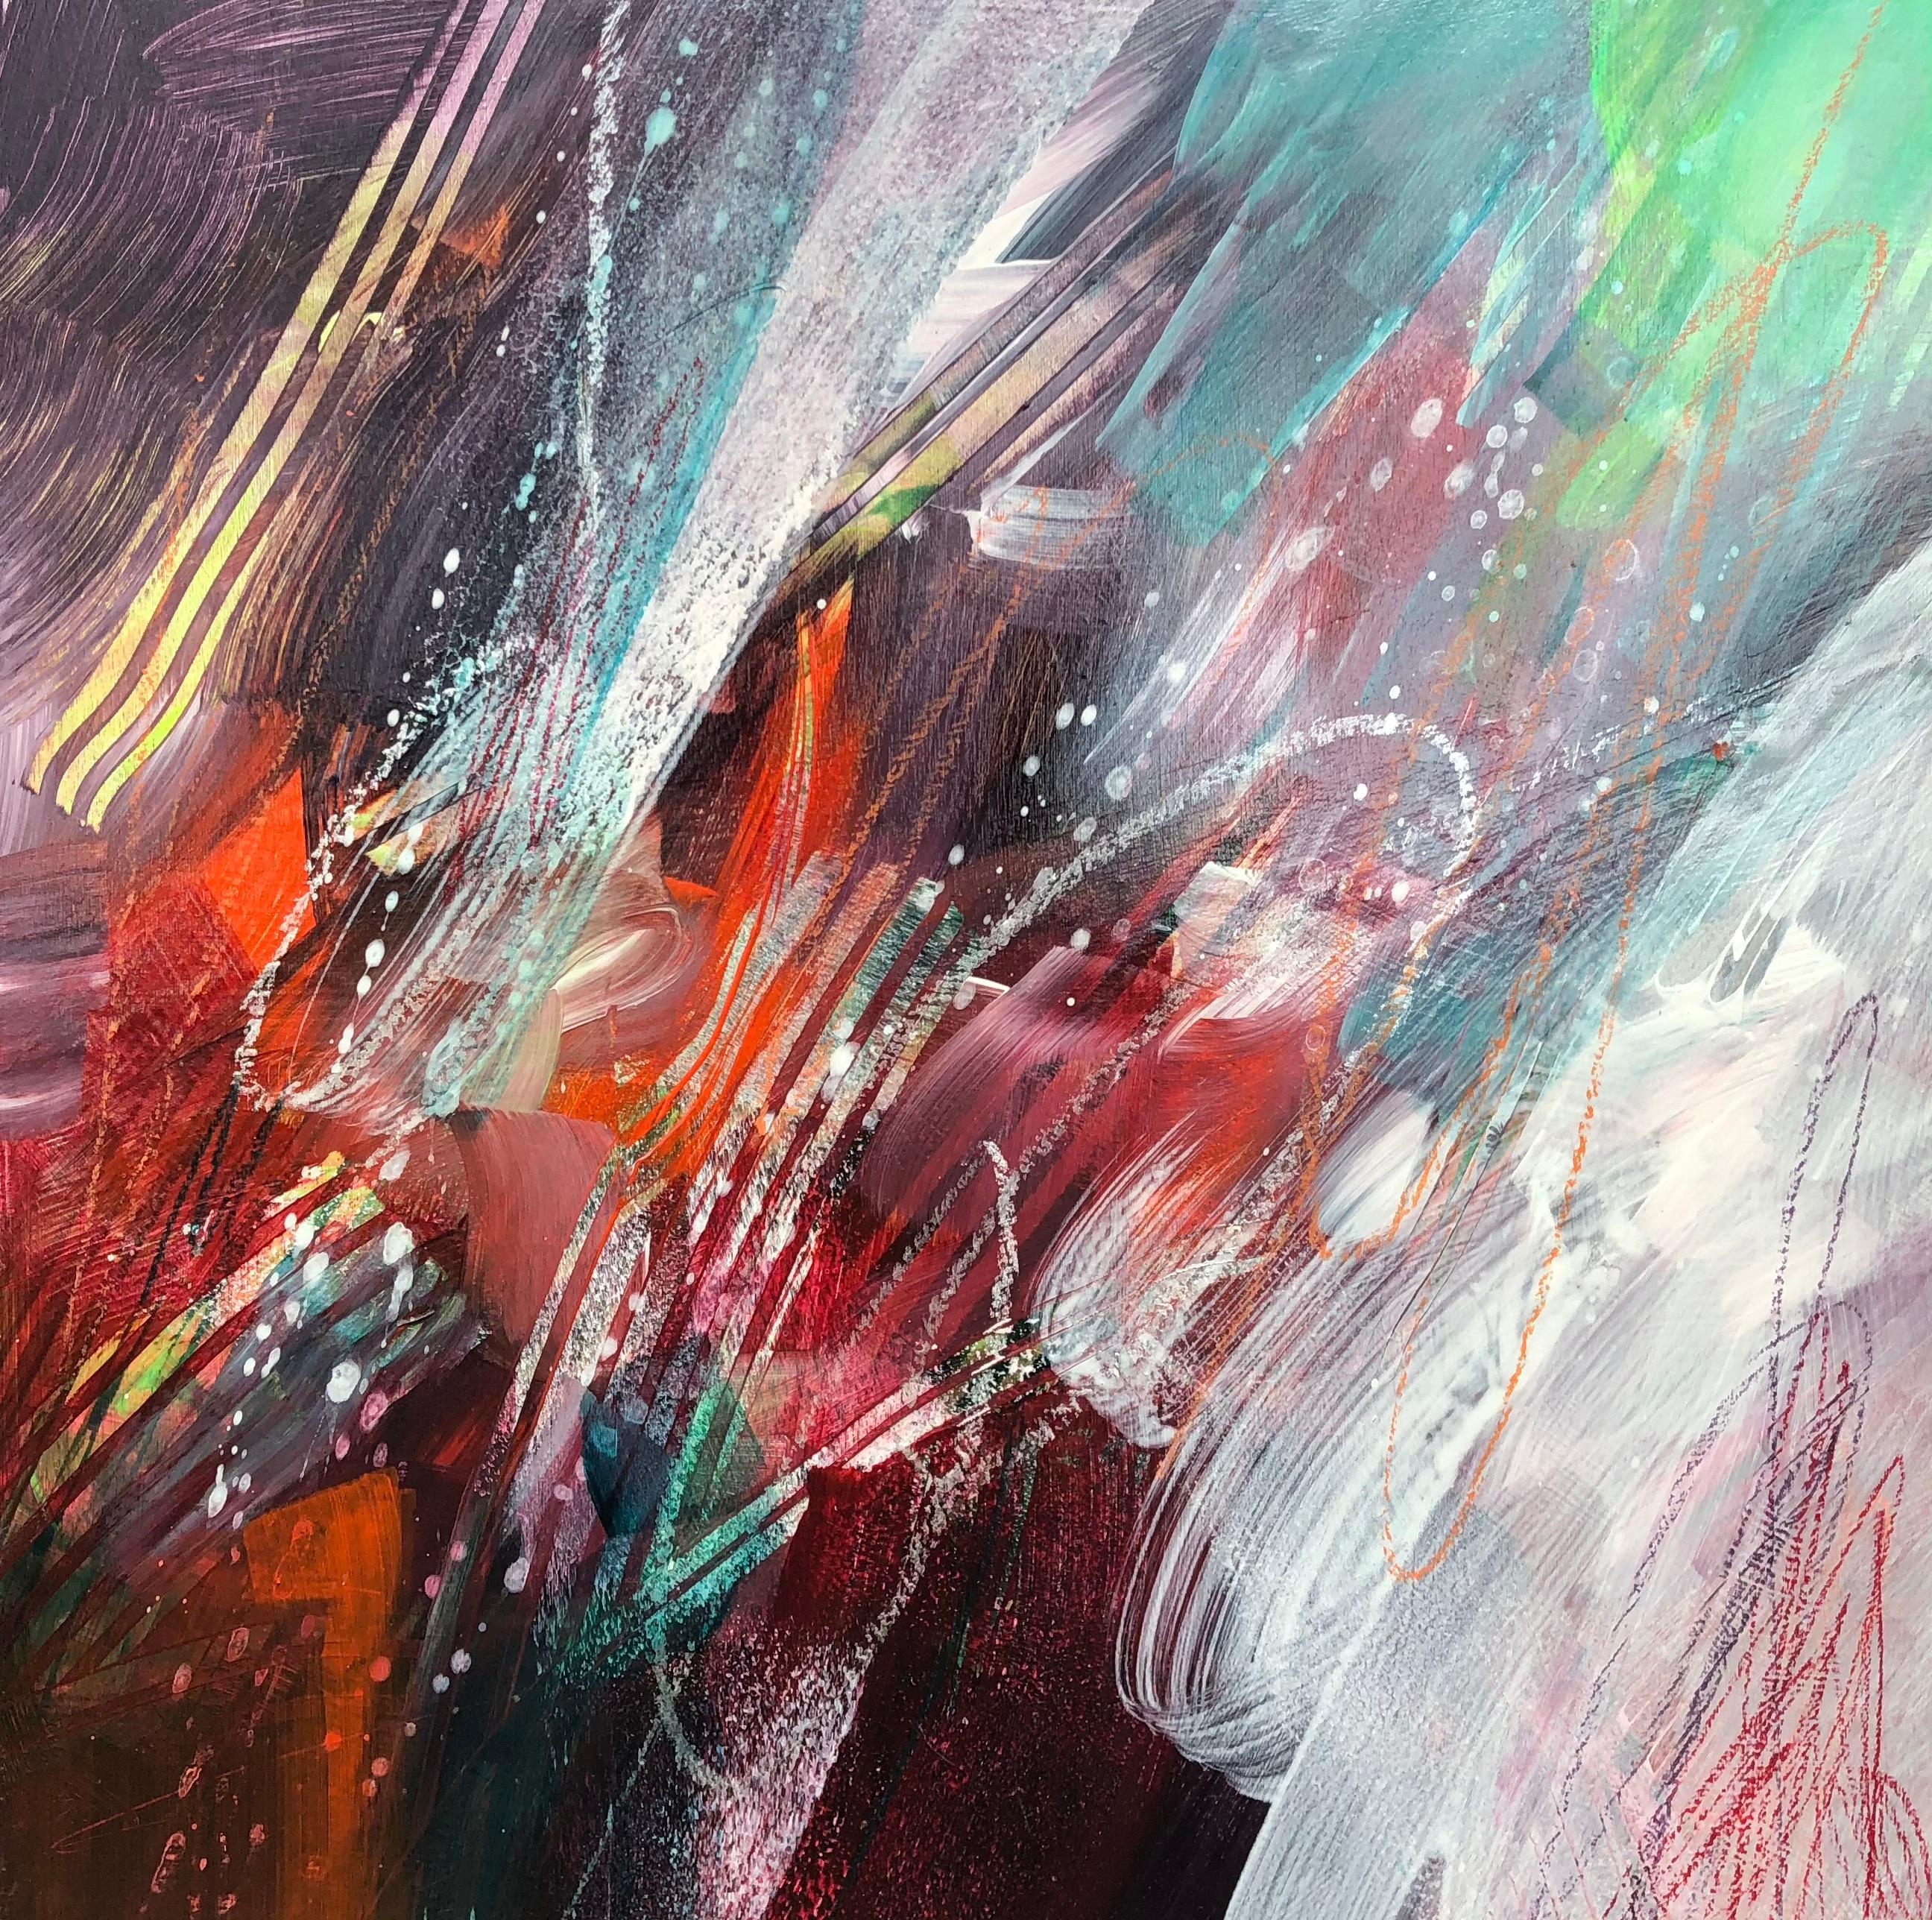 <p>Artist Comments<br />The second piece in artist Courtney Jacobs's five-piece series titled Flazoops. This series of dynamic abstracts utilizes a gestural and vibrant approach. Incorporating energetic motion through different ways of paint